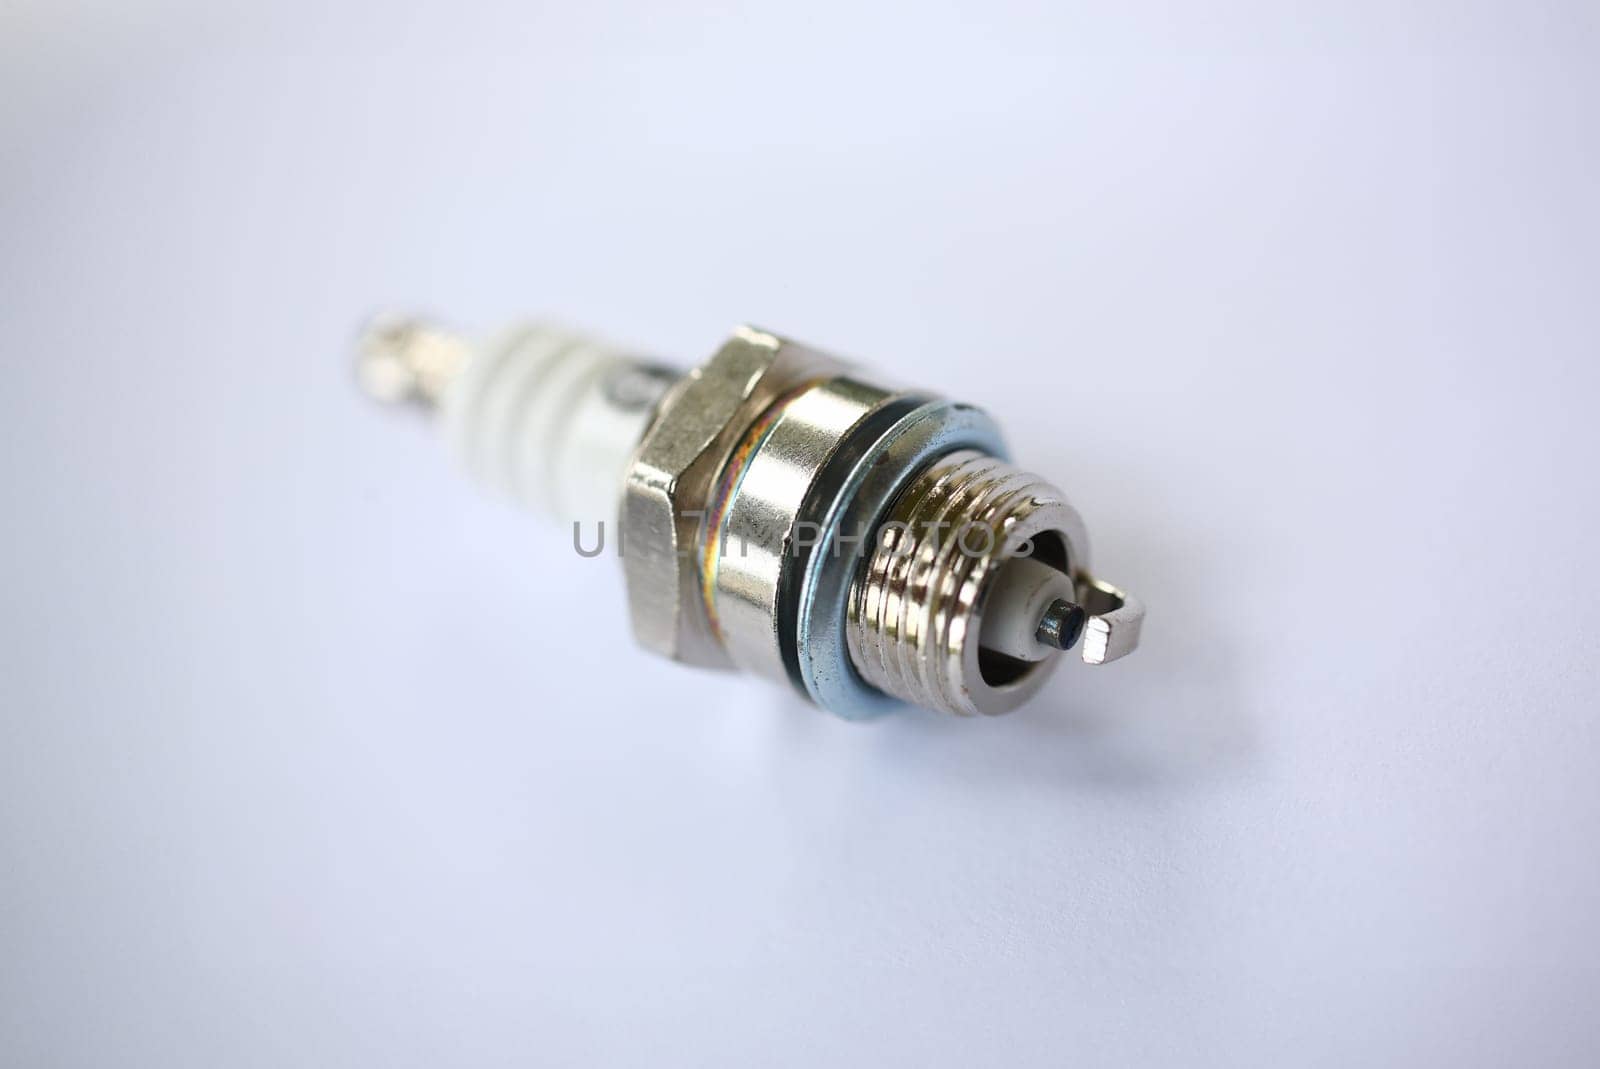 Close-up of metal car spark plug using for ignition. Device made from steel ceramic and aluminum. Selective focus on front part. Construction machinery concept